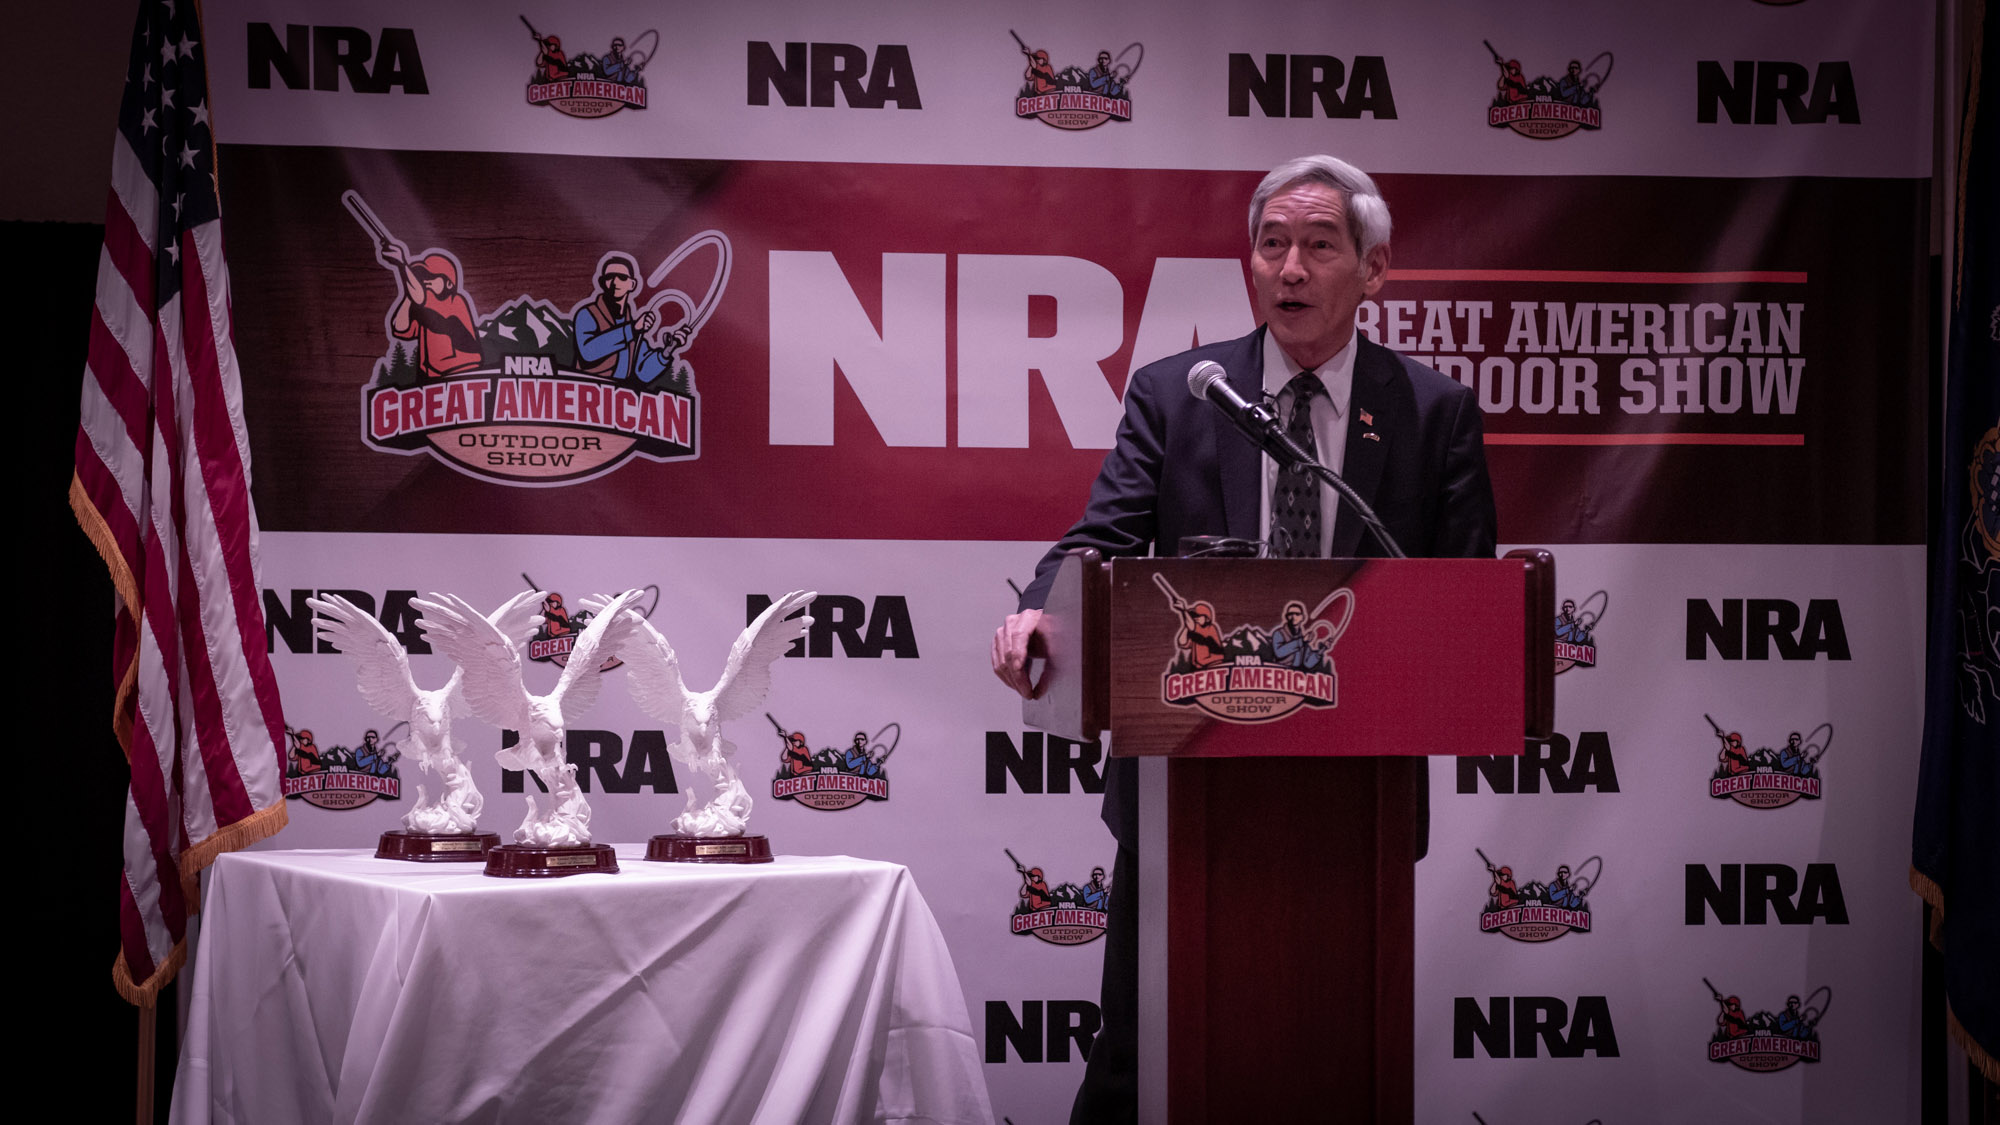 NRA First Vice President Willes Lee speaking to the crowd at the 2022 NRA Great American Outdoor Show opening ceremony.